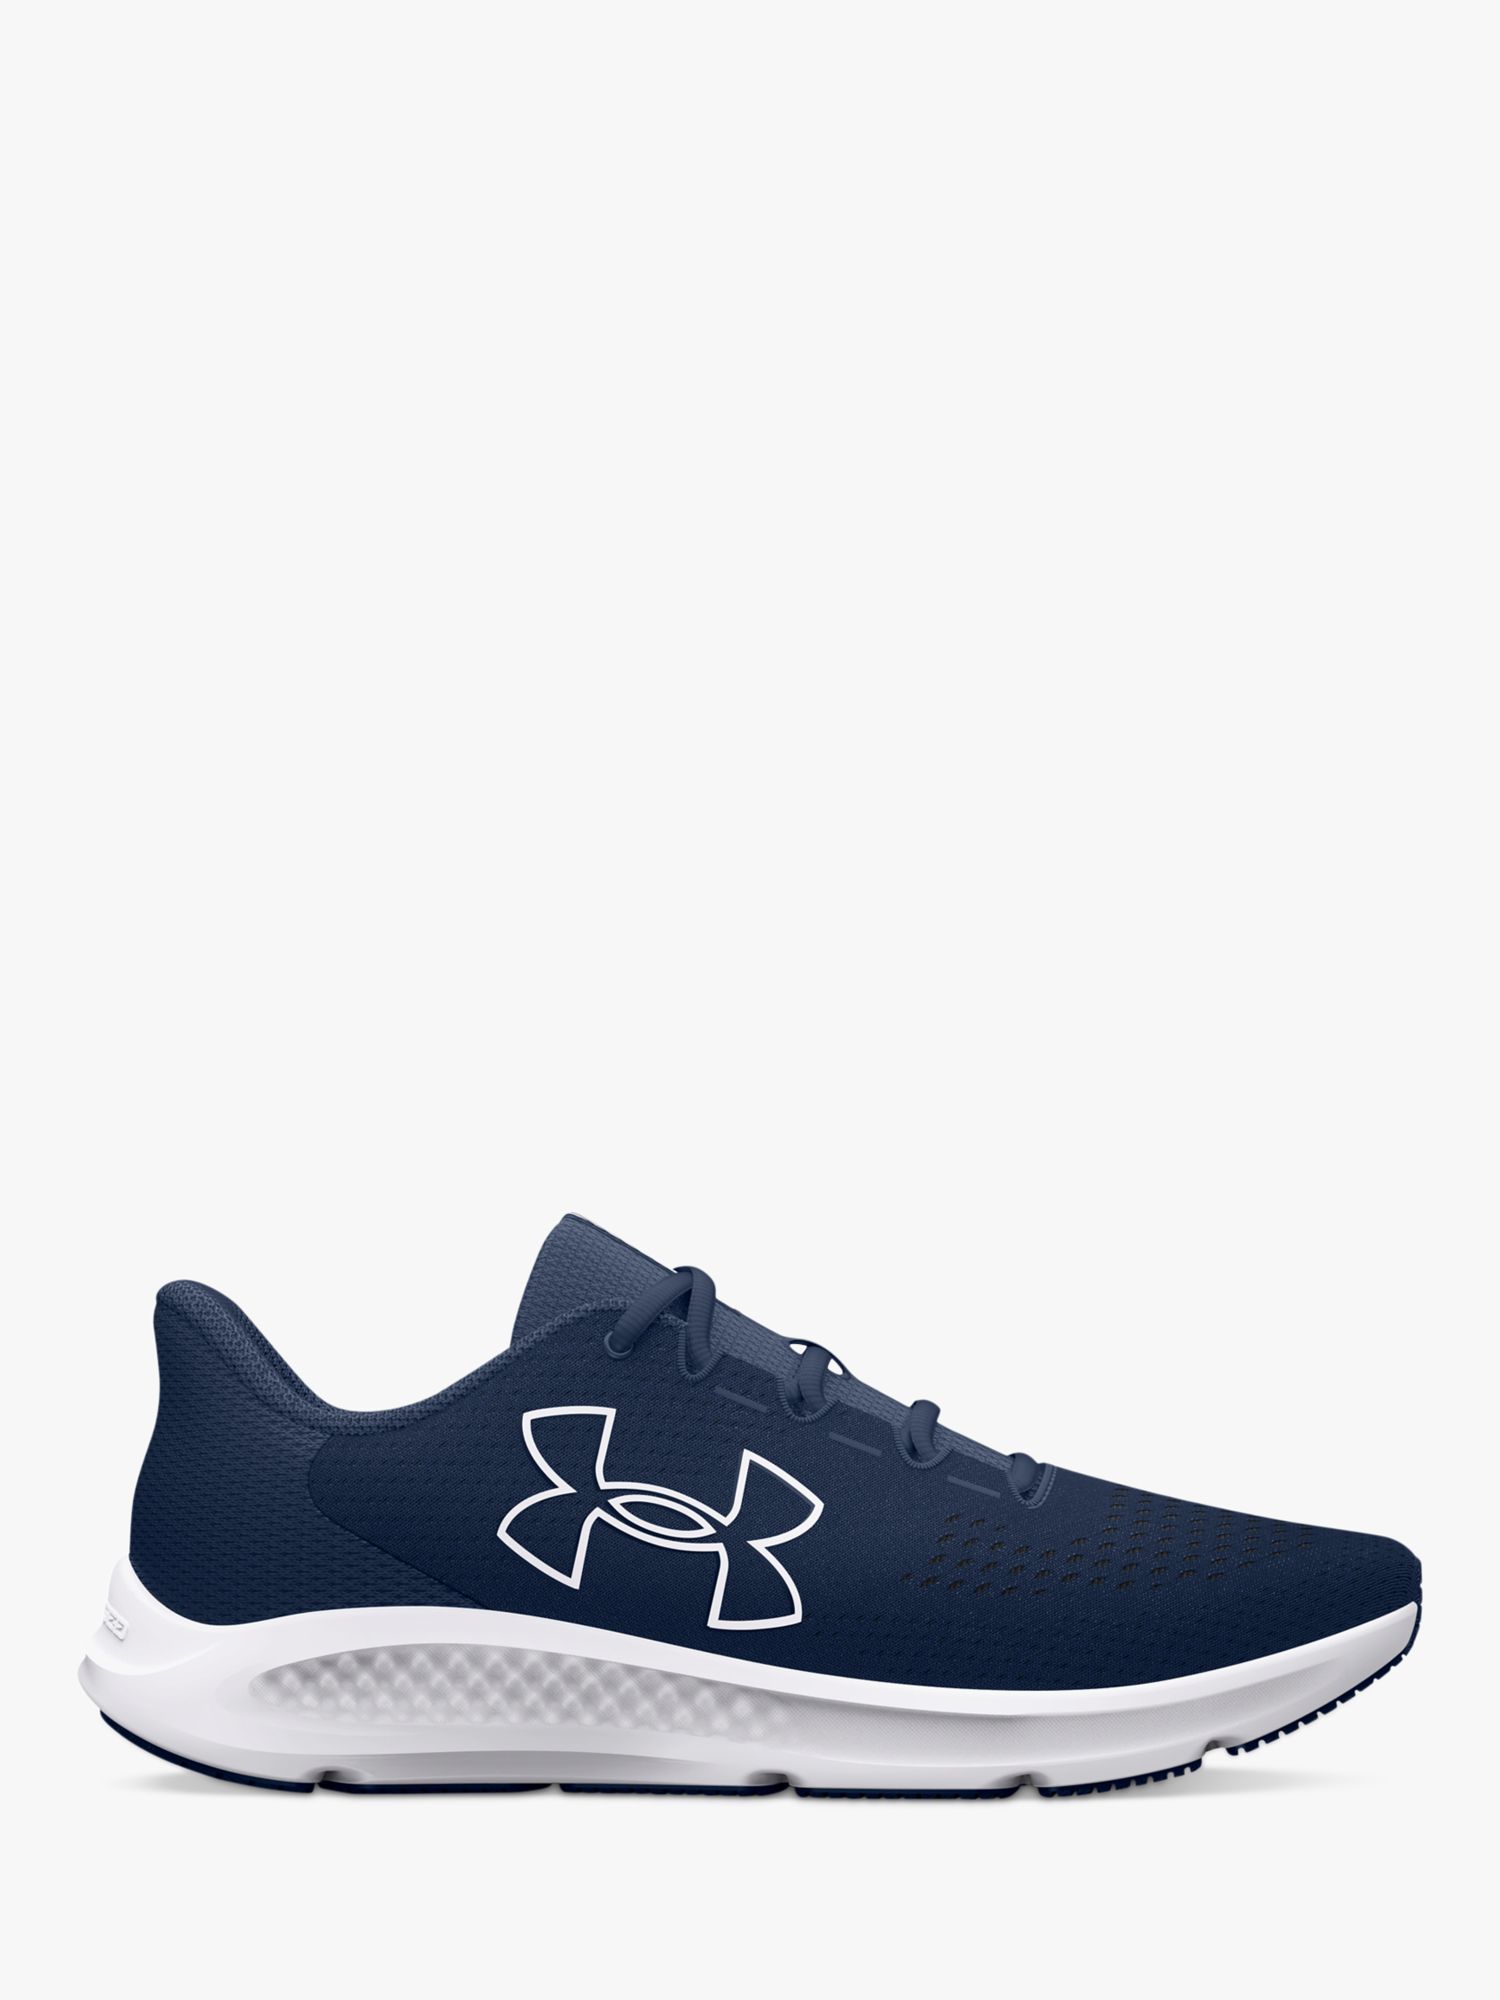 Under Armour Charged Pursuit 2, review and details